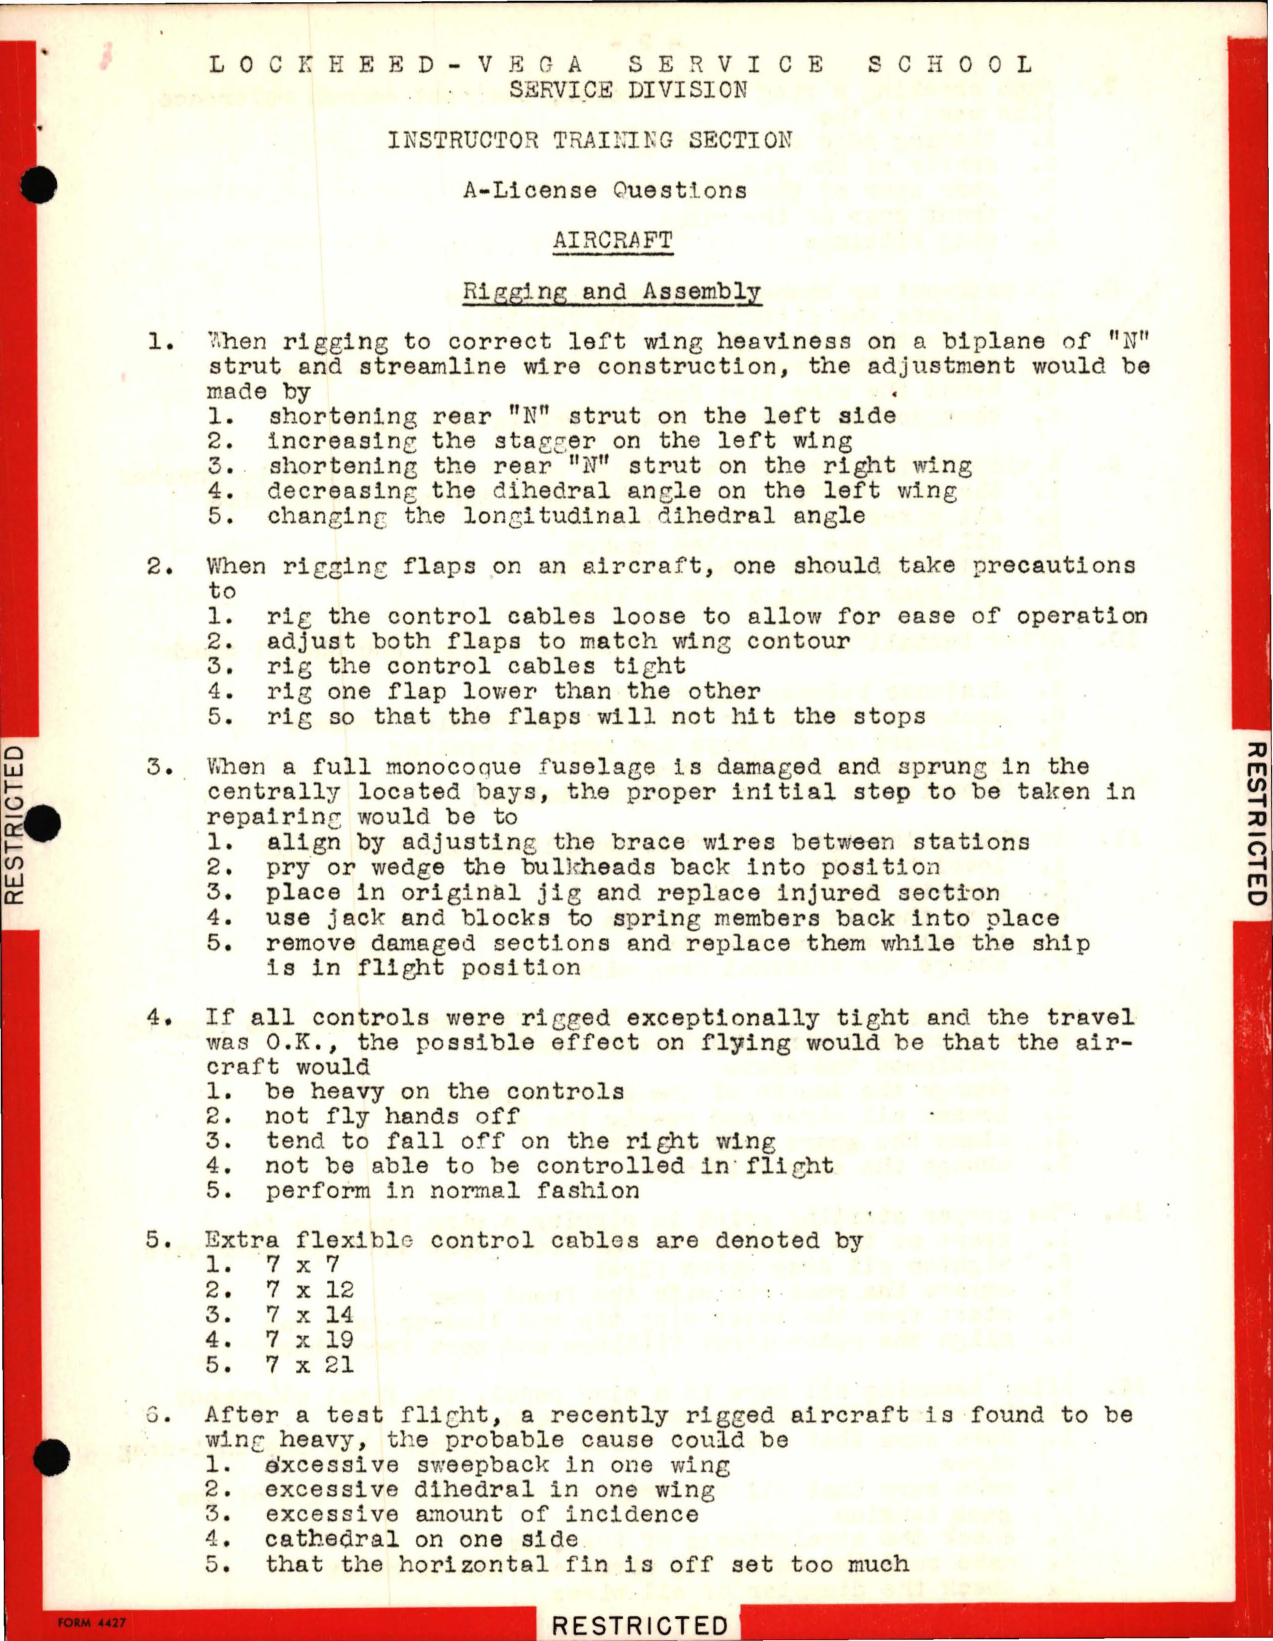 Sample page 1 from AirCorps Library document: Instructor Training Questions for Rigging and Assembly, Lockheed-Vega Service School